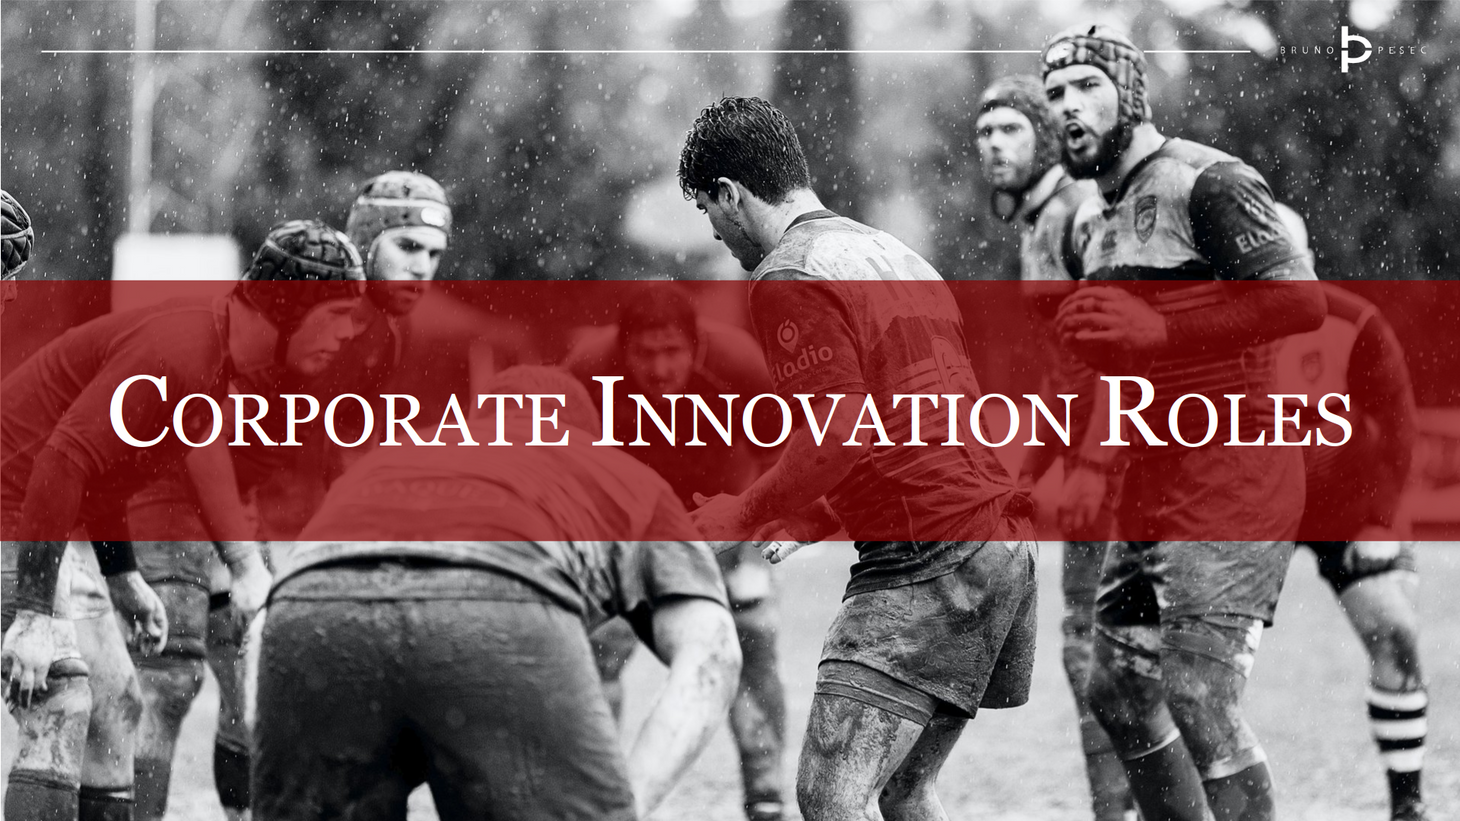 Corporate innovation roles